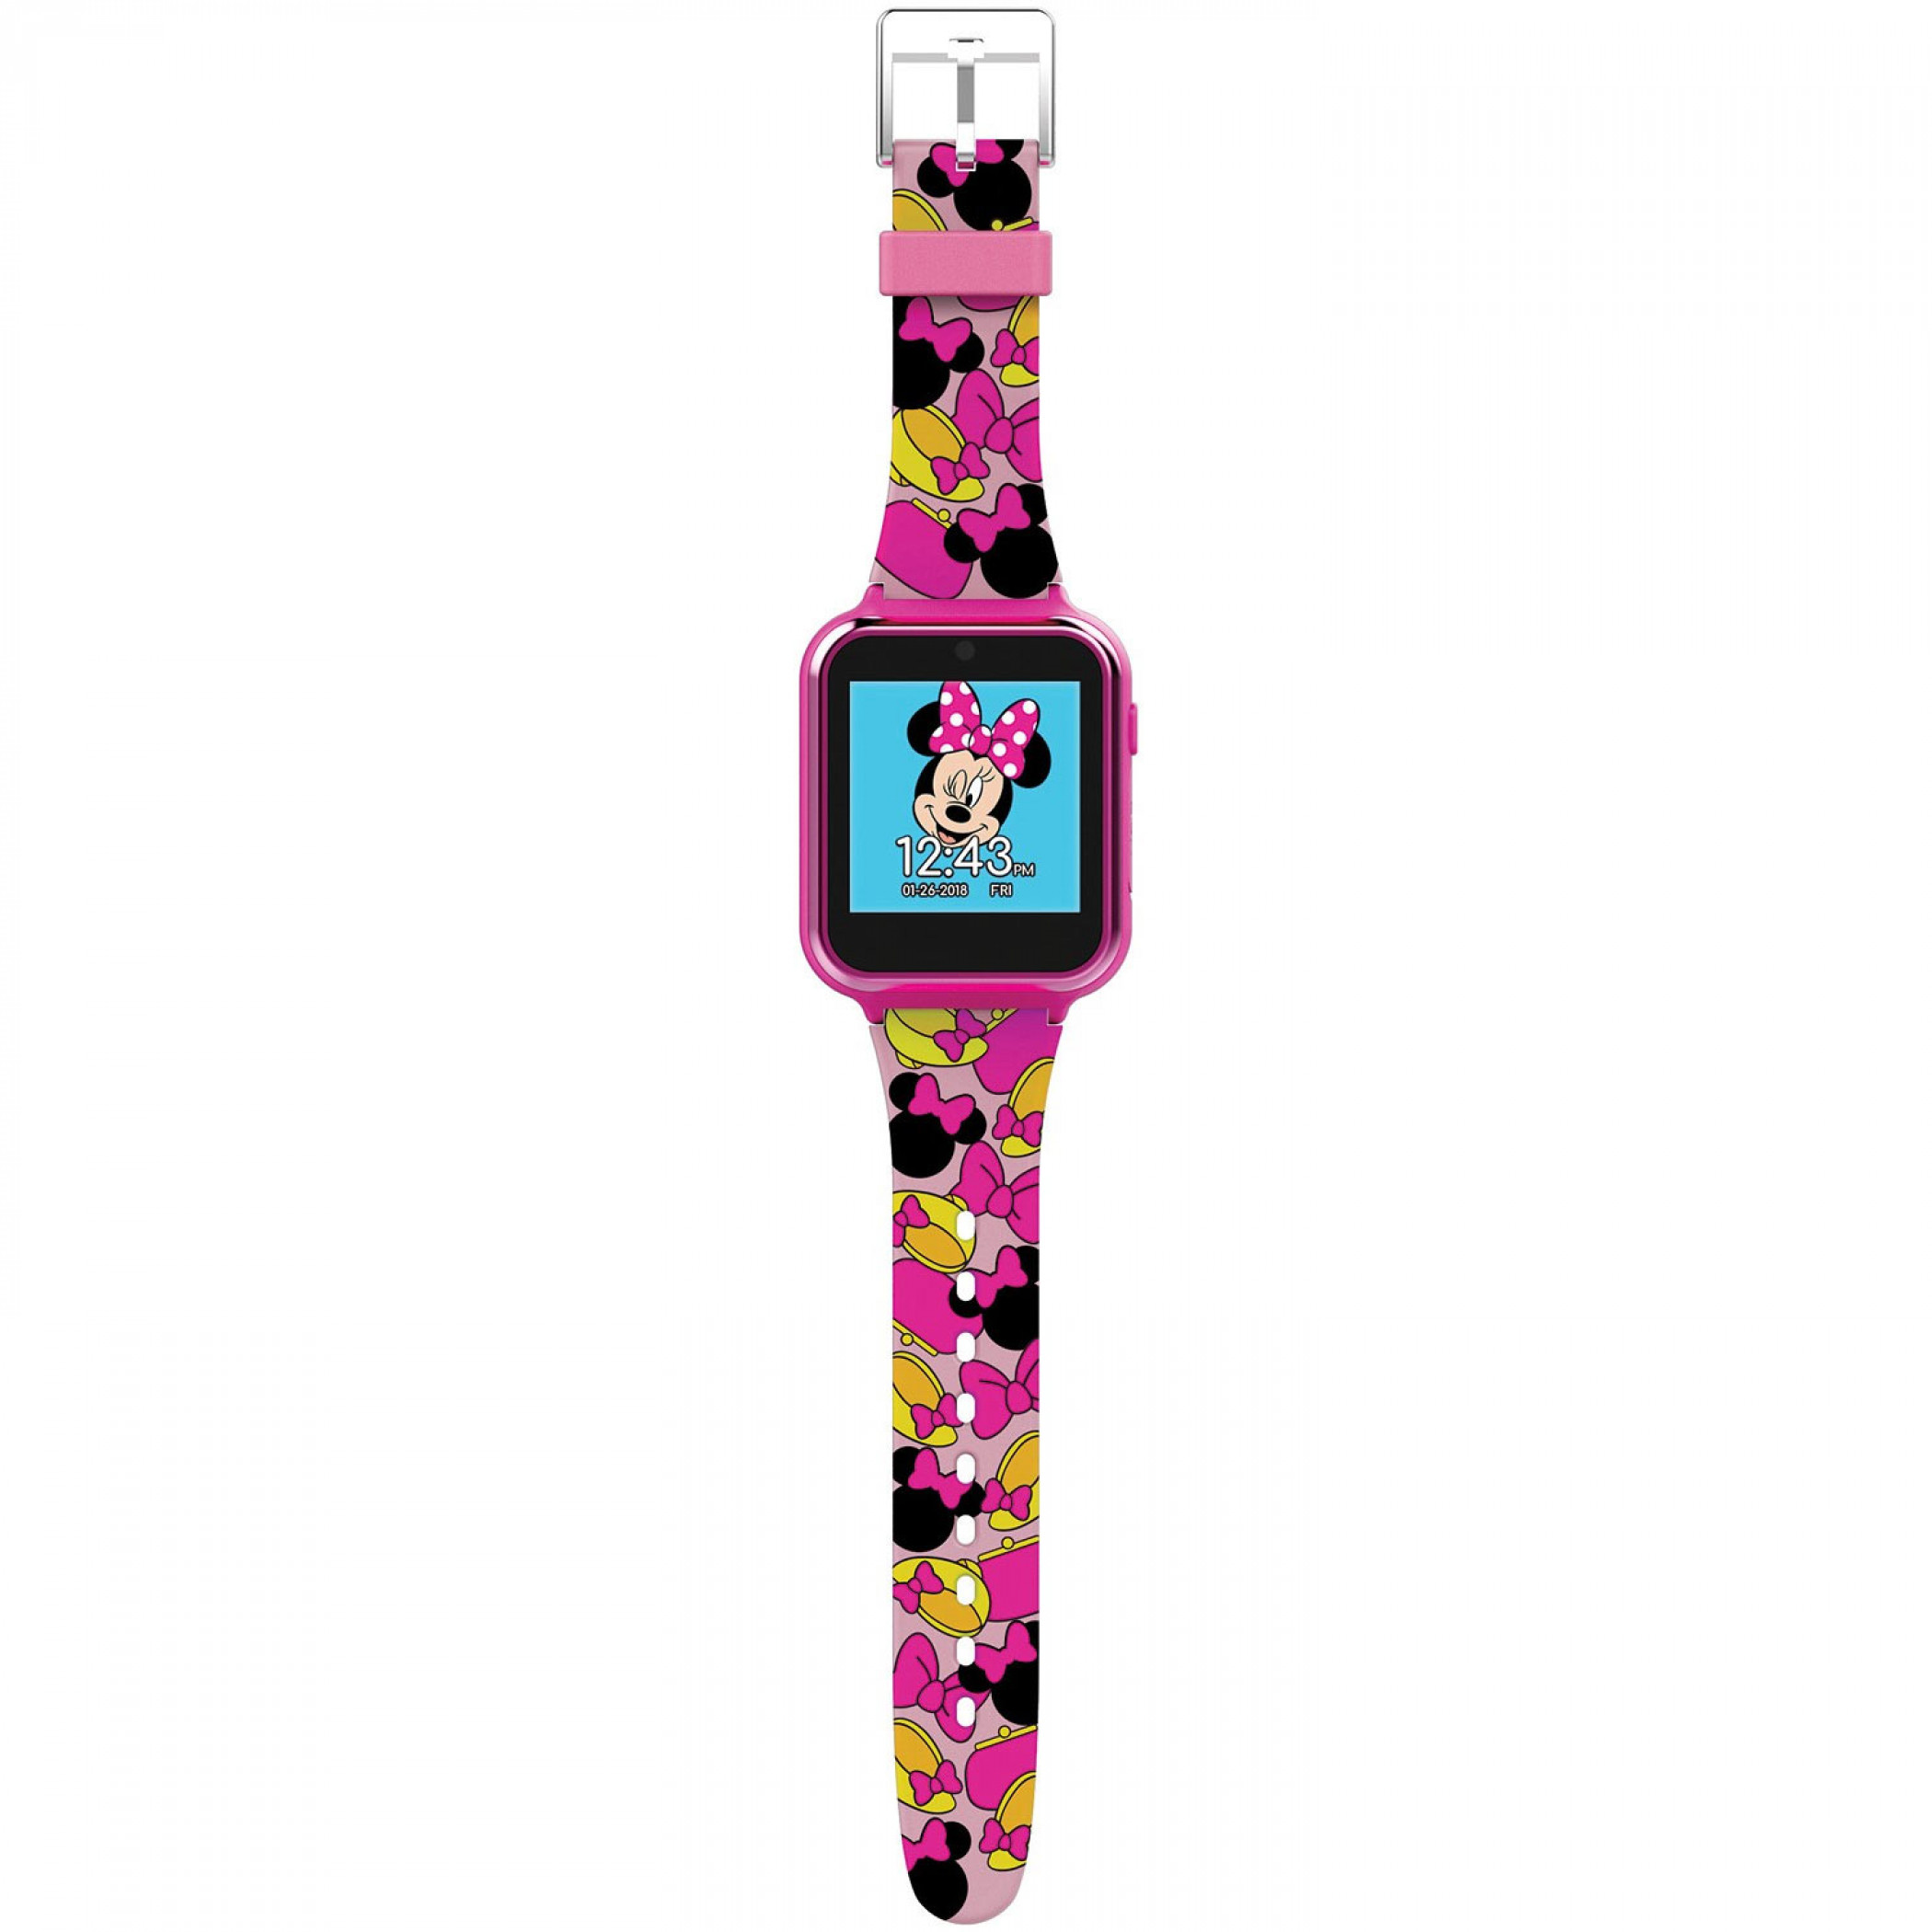 Minnie Mouse Kids Interactive Watch